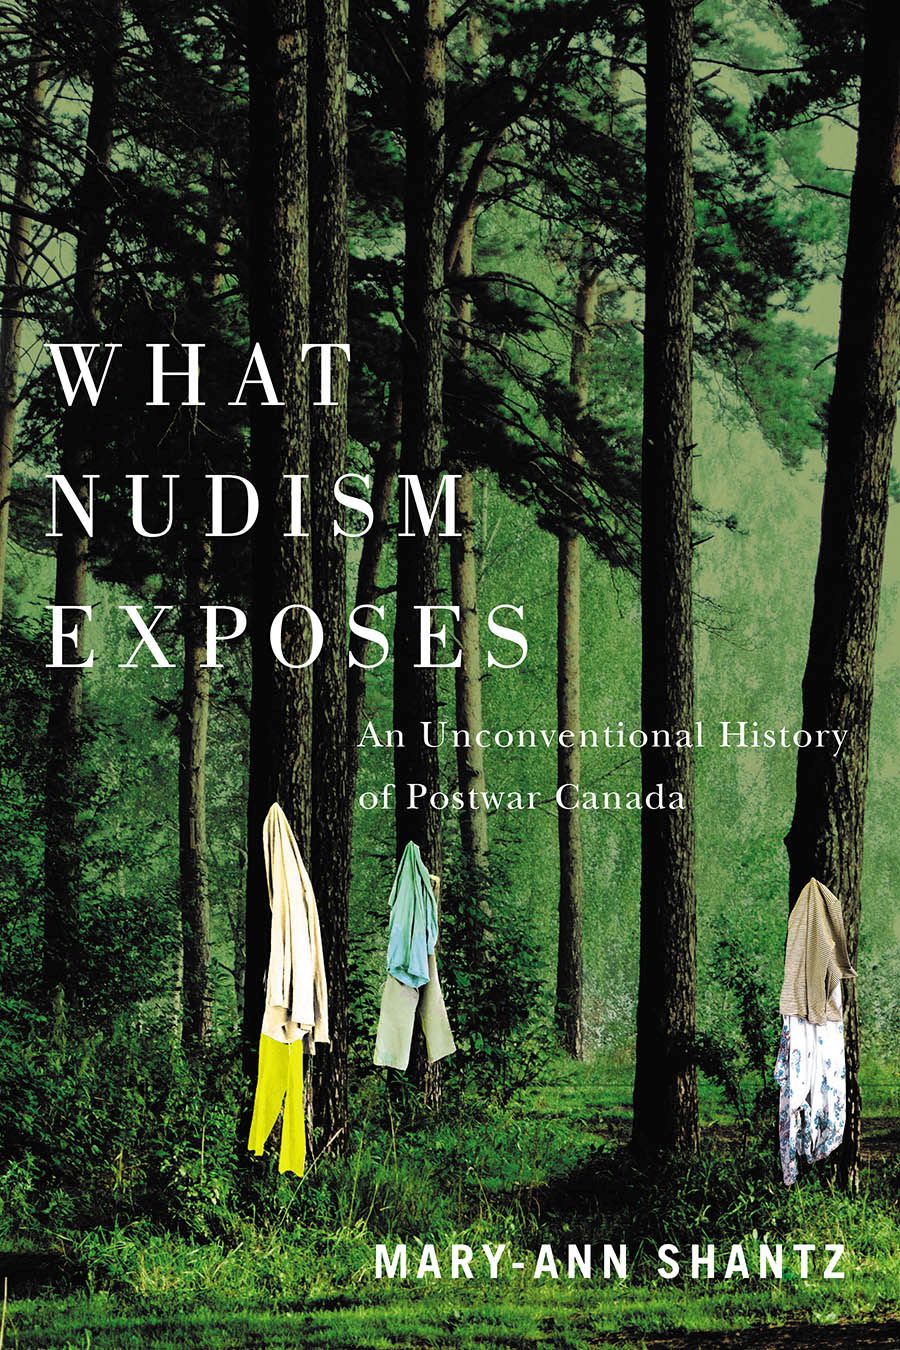 Nudism Free Gallery Changes - What Nudism Exposes: An Unconventional History of Postwar Canada, Shantz